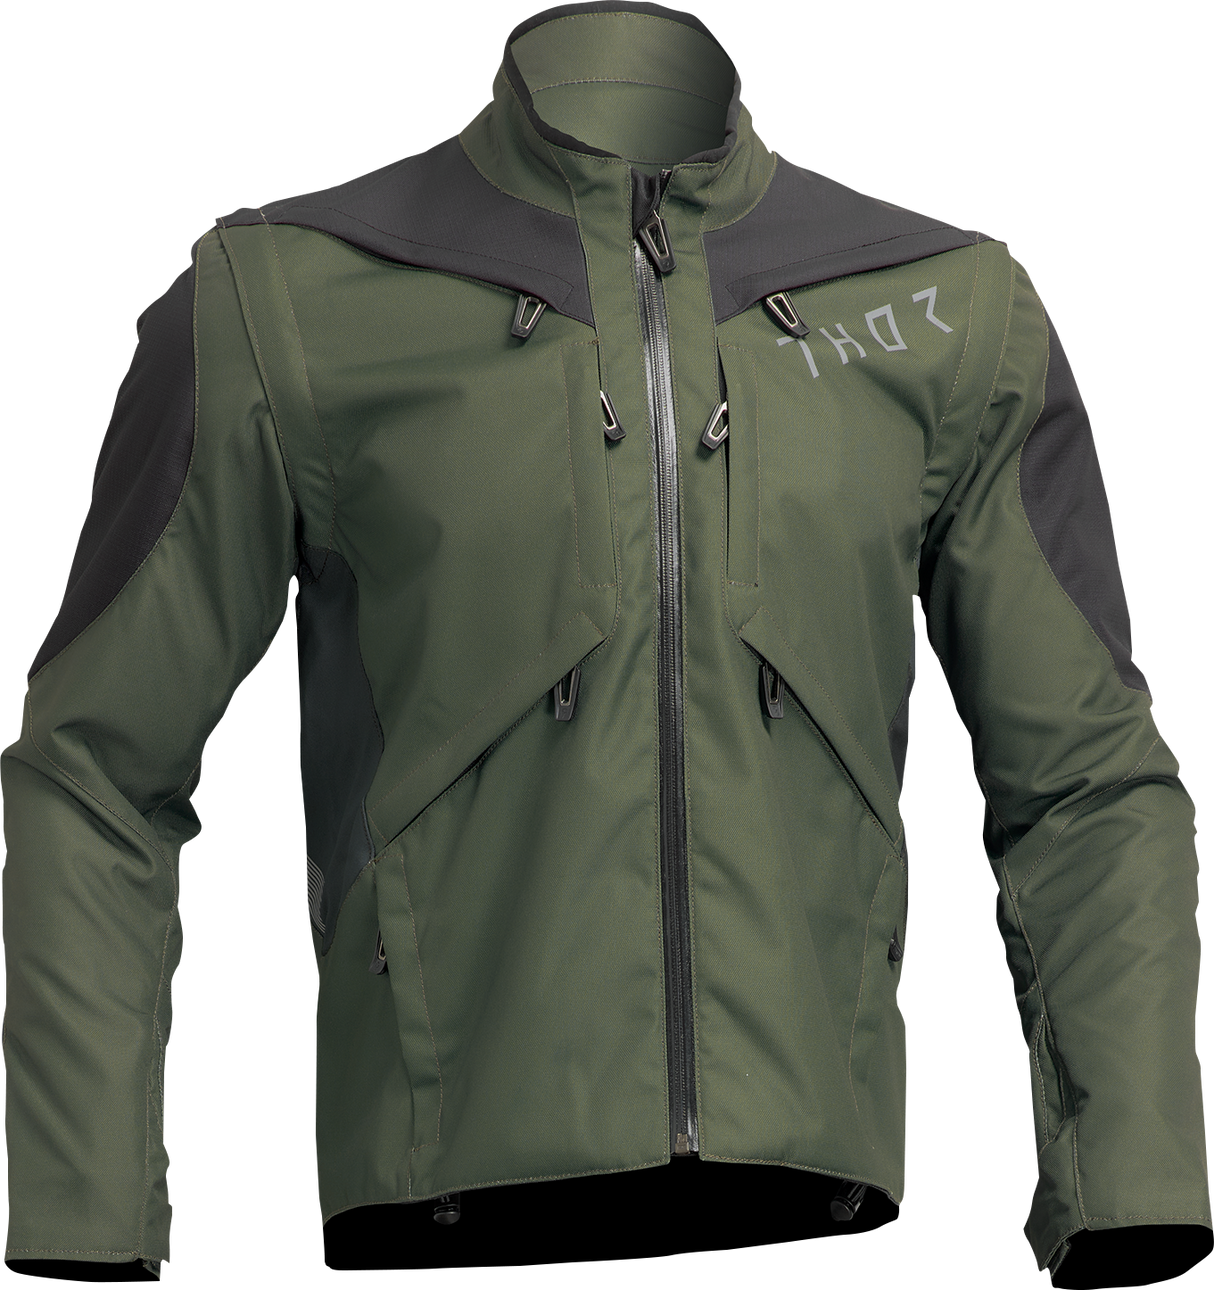 THOR Terrain Jacket - Army Green/Charcoal - Large 2920-0704